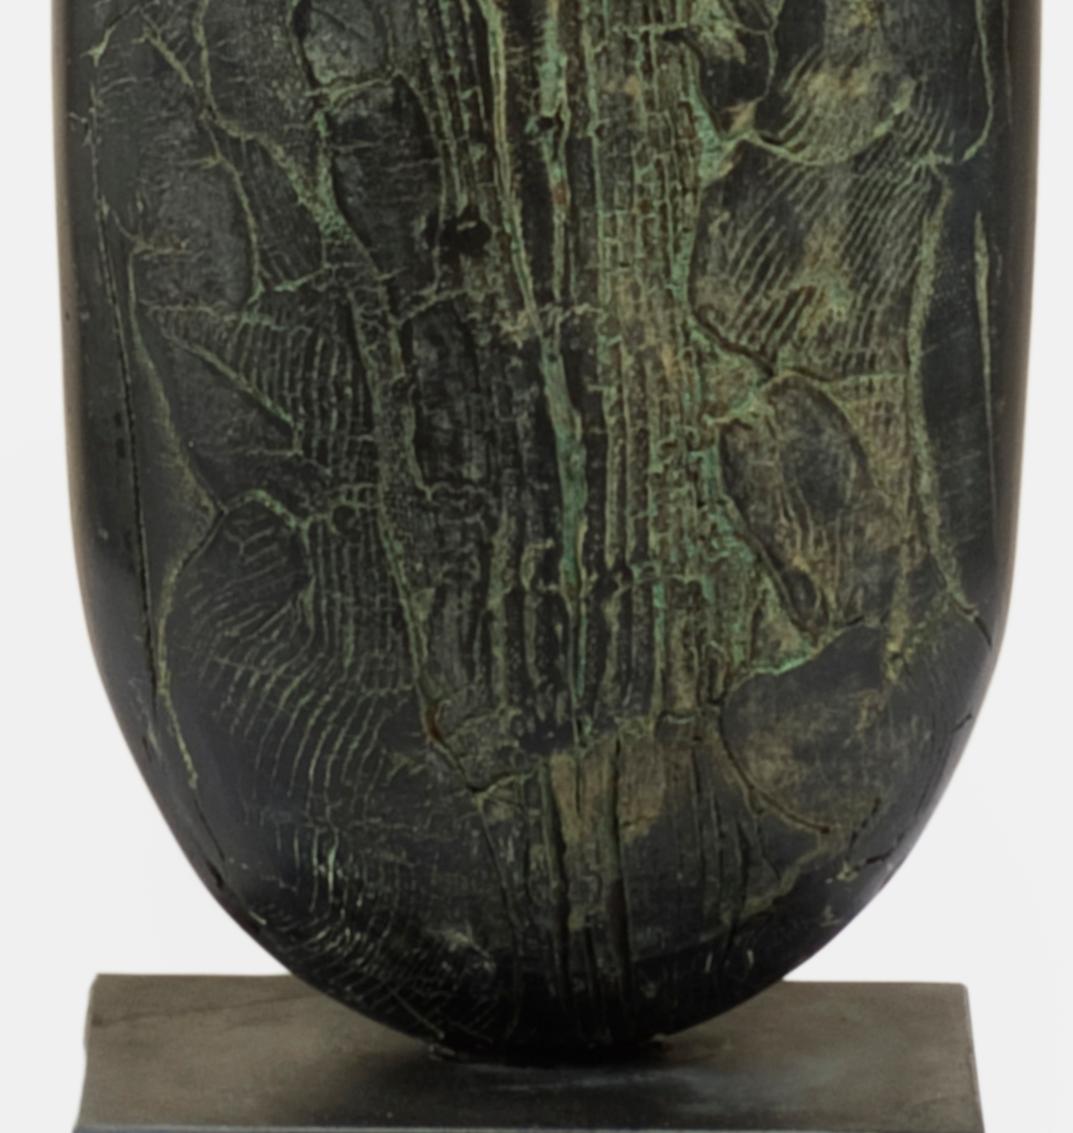 This obelisk shaped object is completely handmade, fired ceramic. The black surface is textured with ridges and grooves which have a green patina due to a natural aging process the artist uses. 

Peter Hayes
Black bottle
ceramic
Measures: 41 H